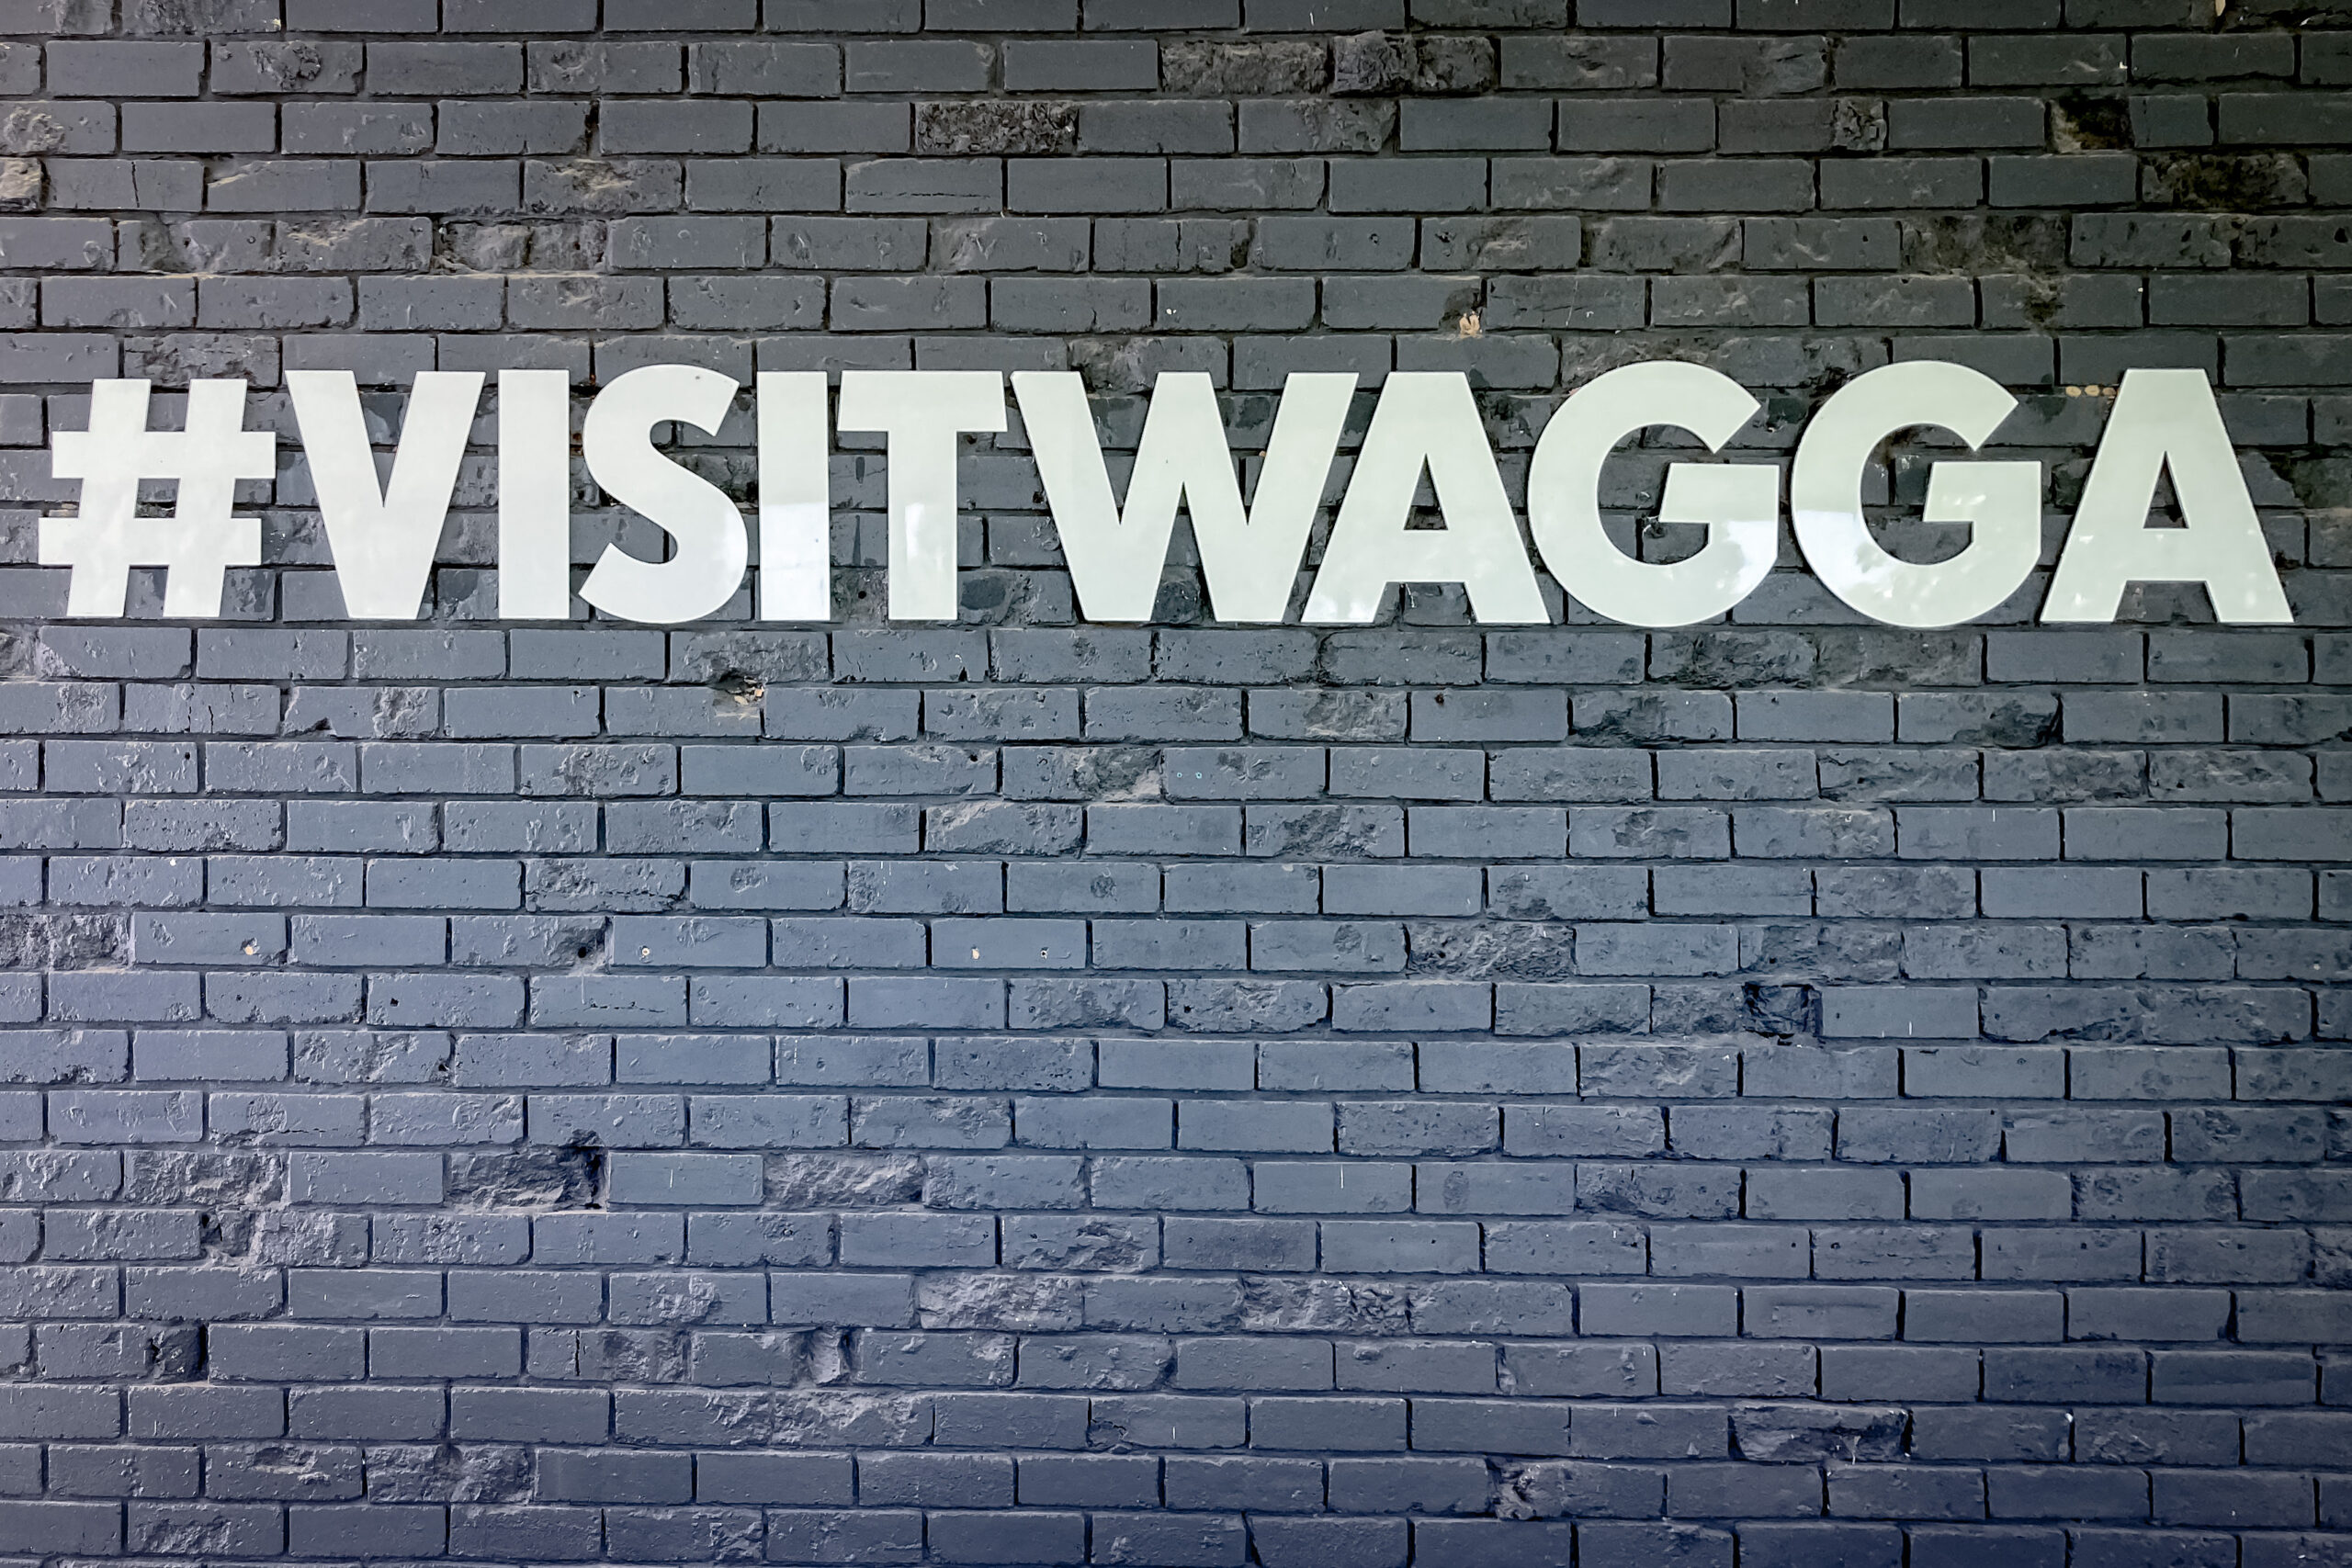 A black painted brick wall with lettering i large white uppercase spelling #VISITWAGGA